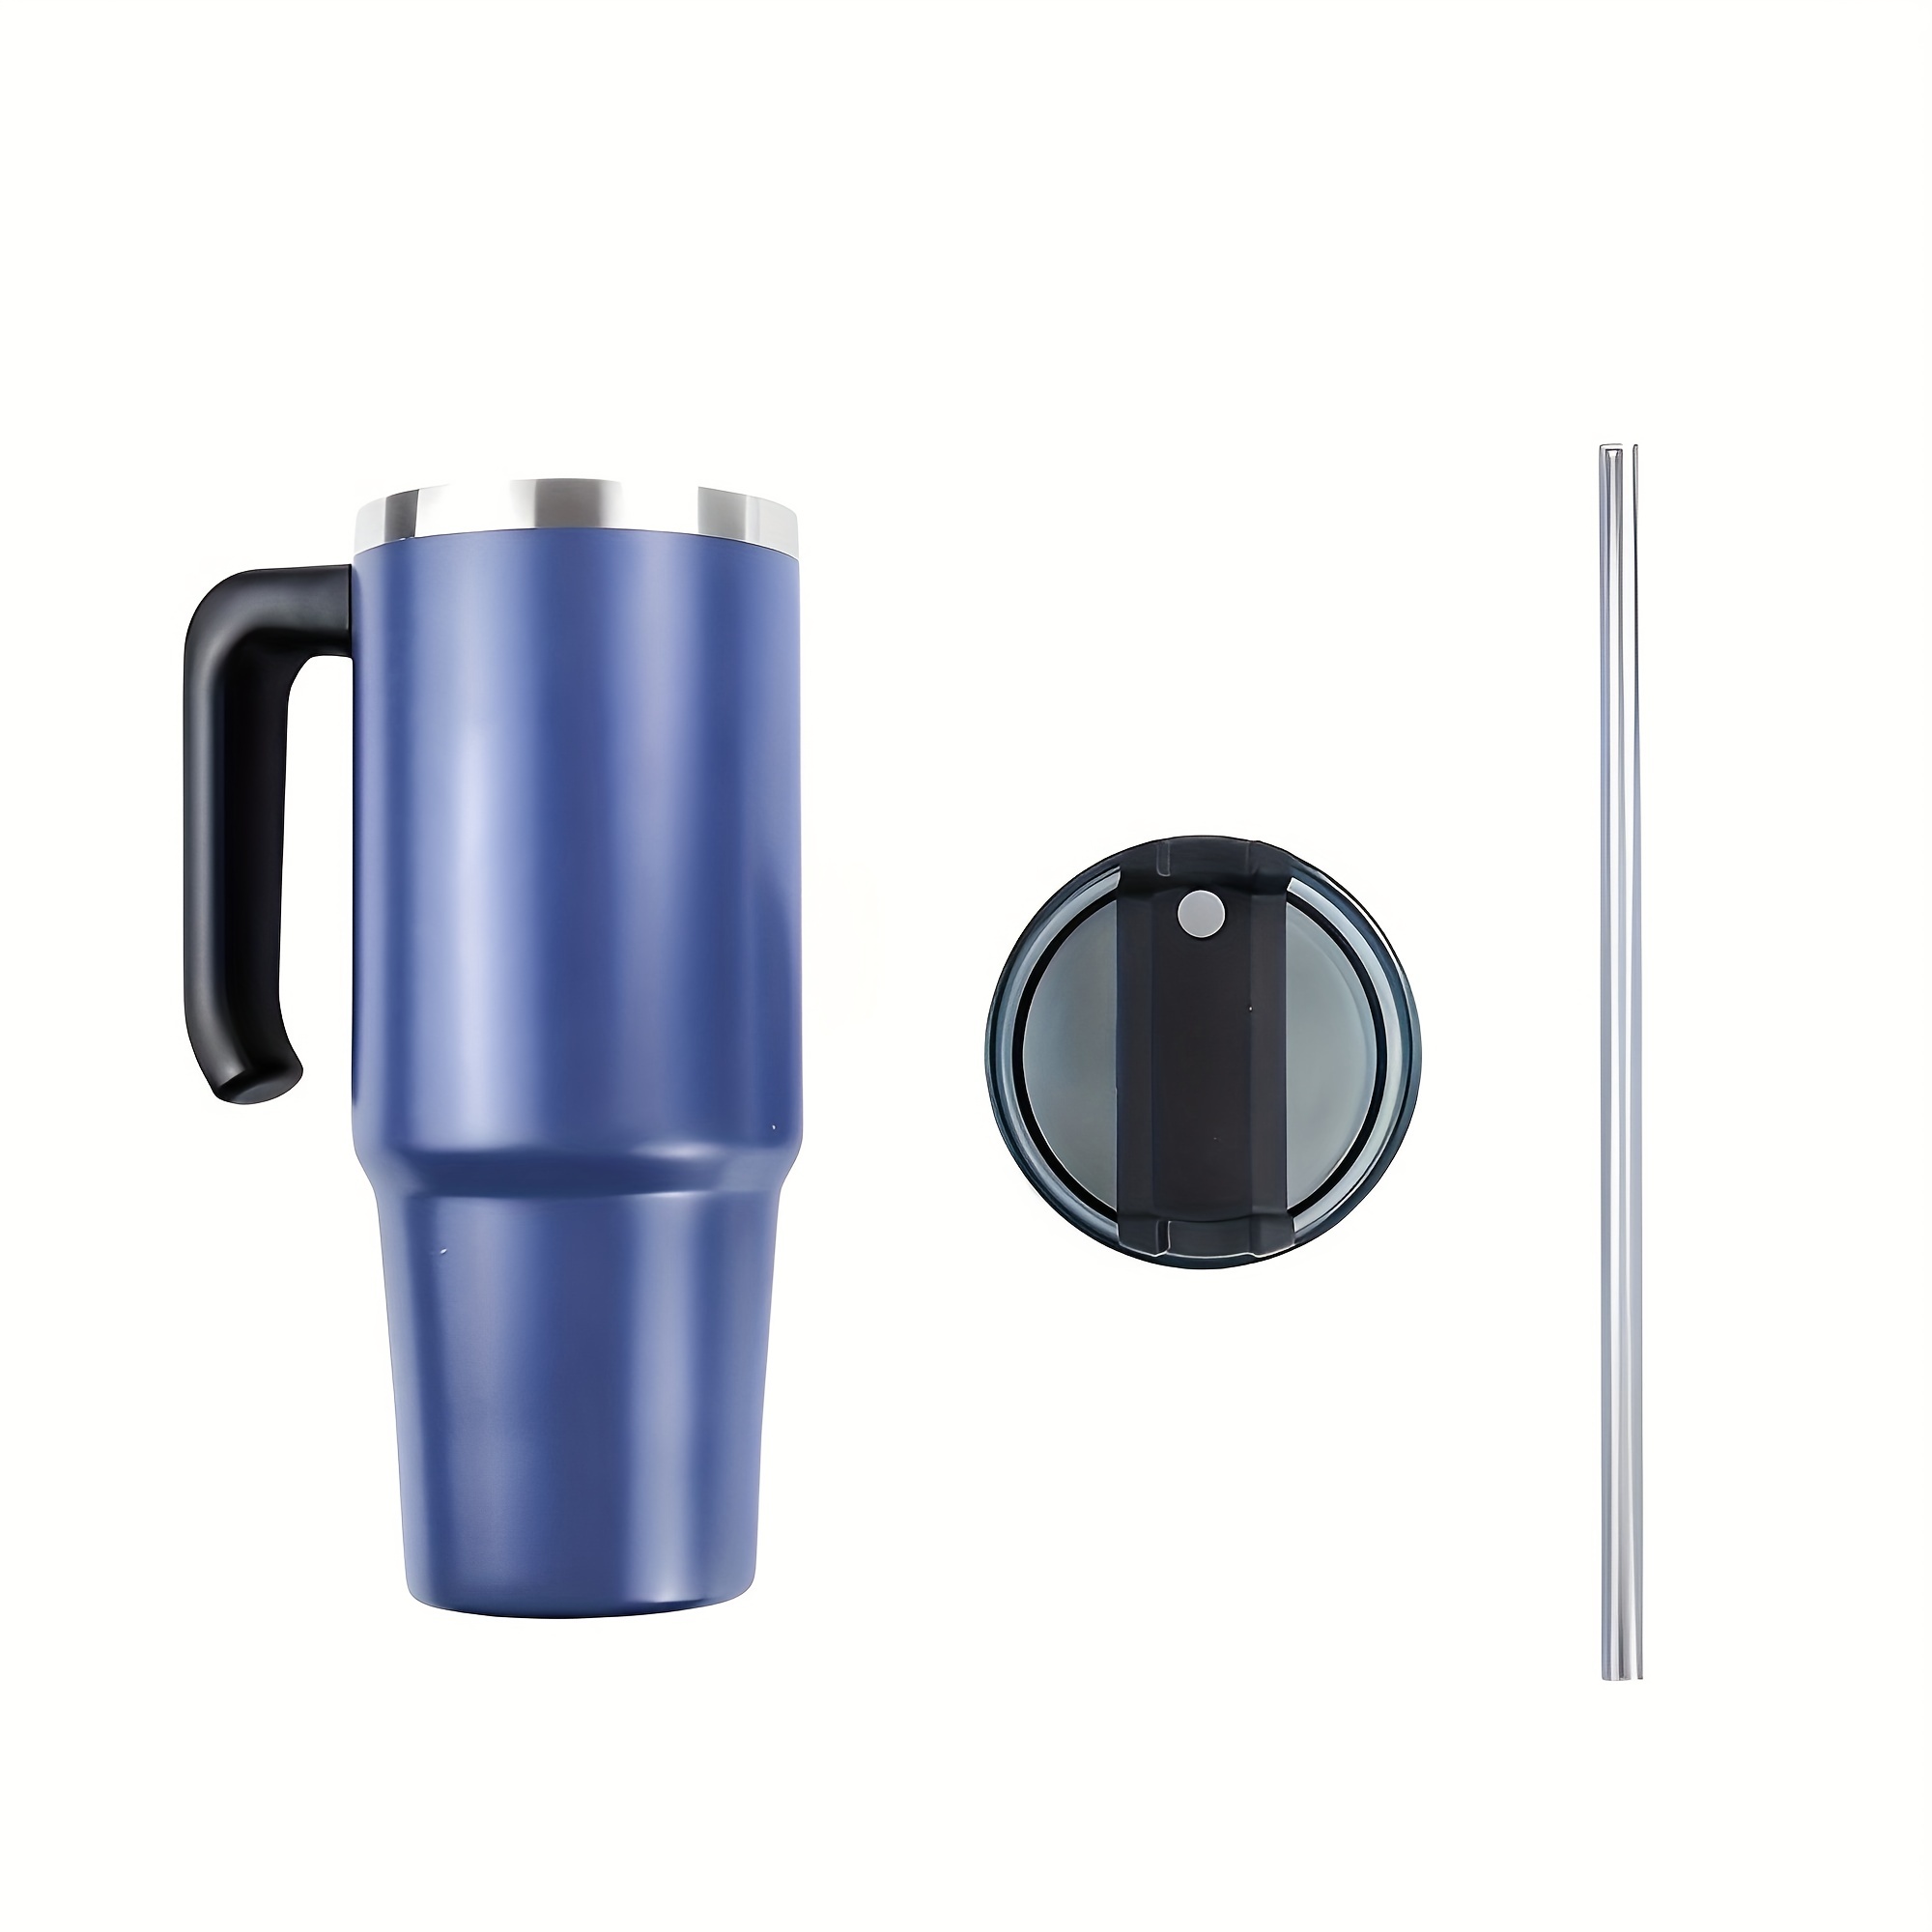 1pc Blue Insulated Coffee Mug, Large Capacity Portable Stainless Steel Cup